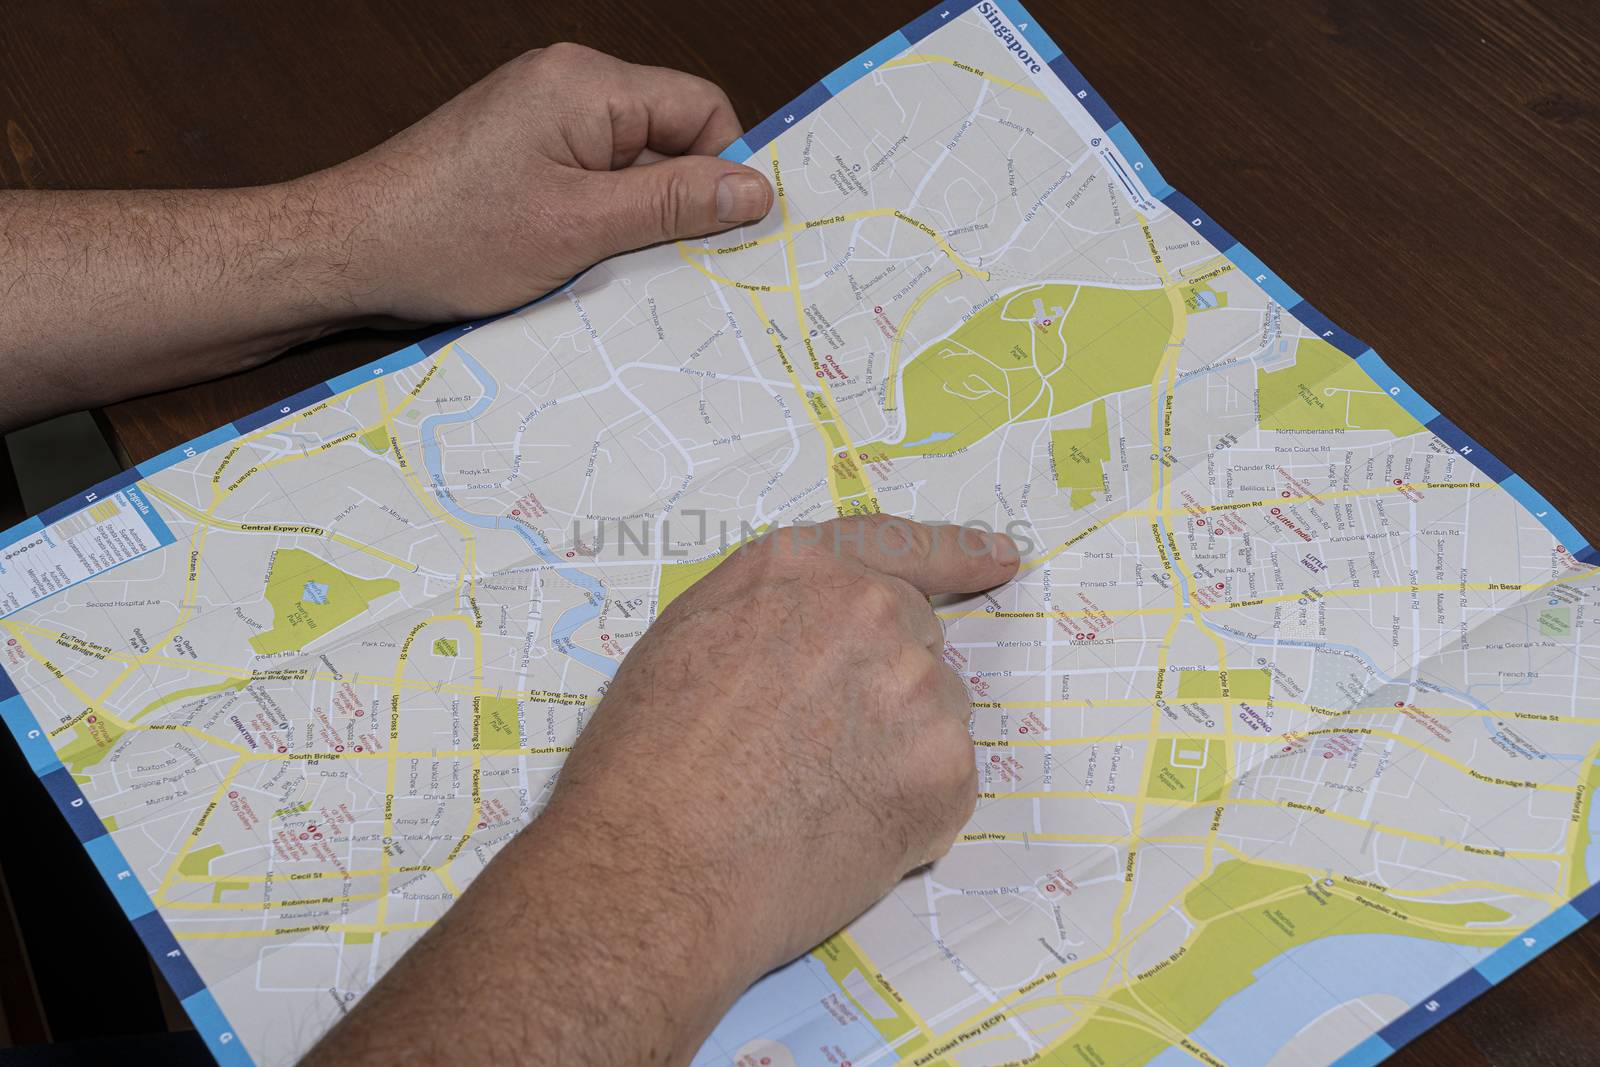 a person viewing the Singapore city map